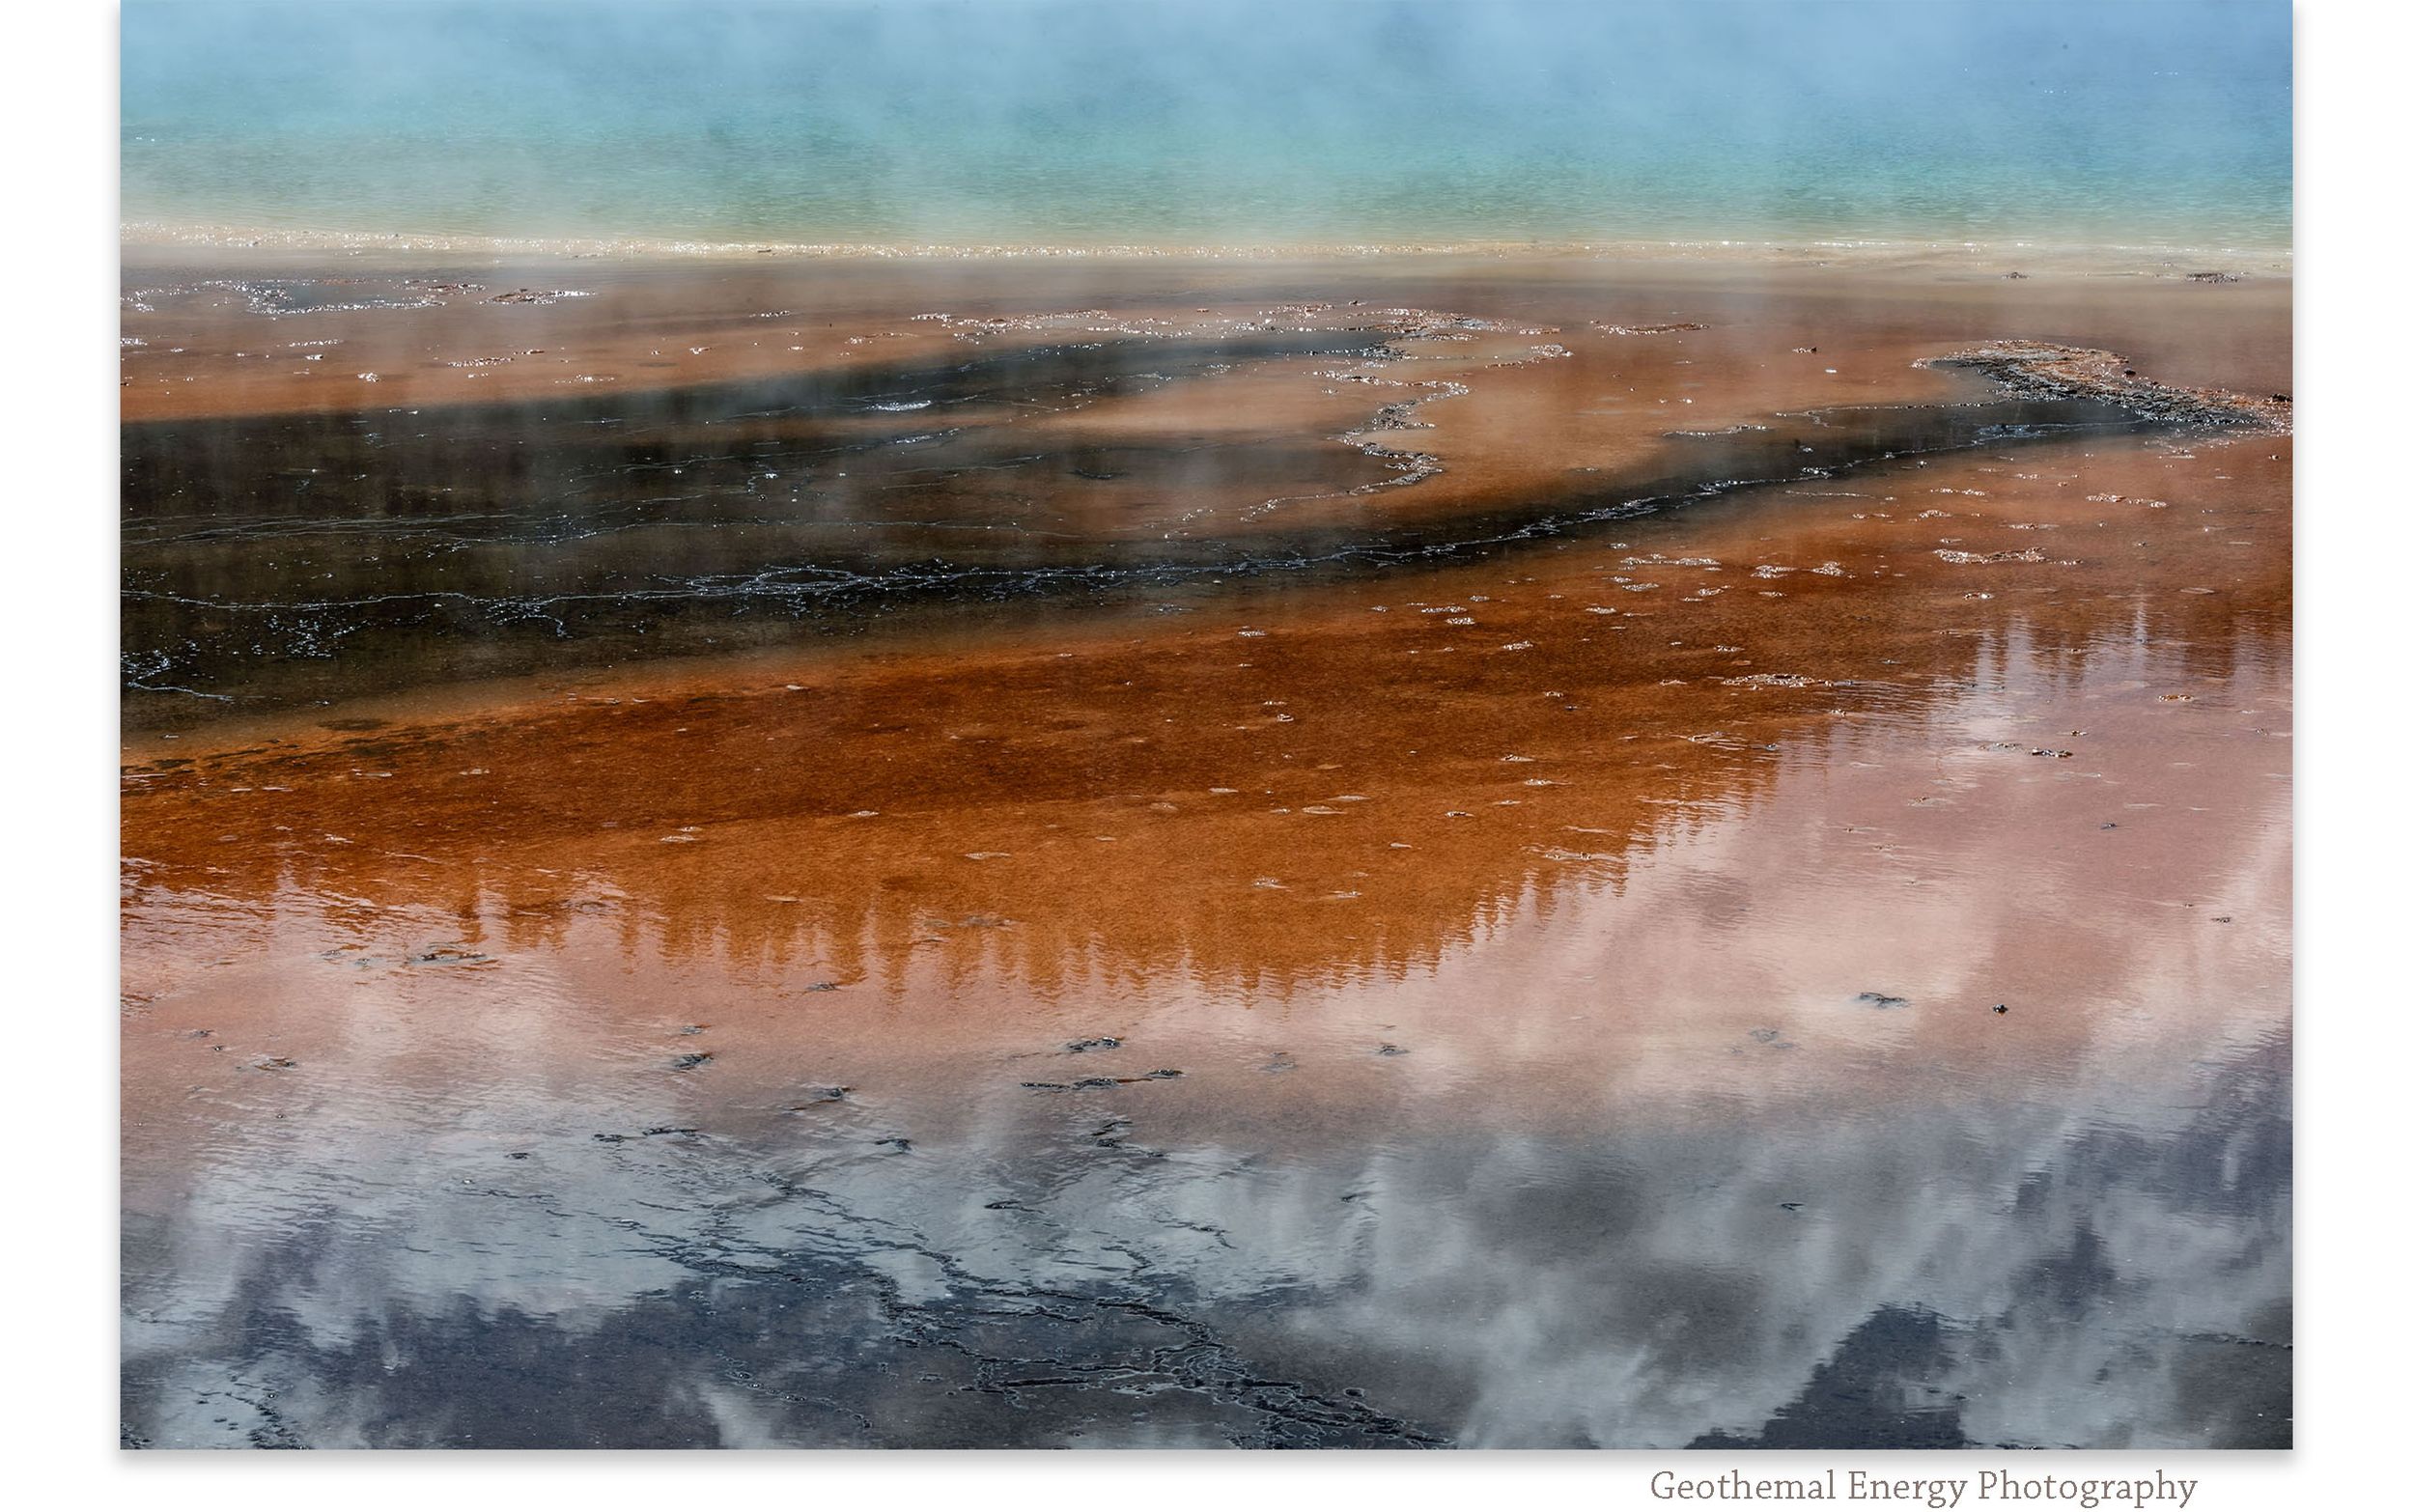 Geothermal Energy Photography